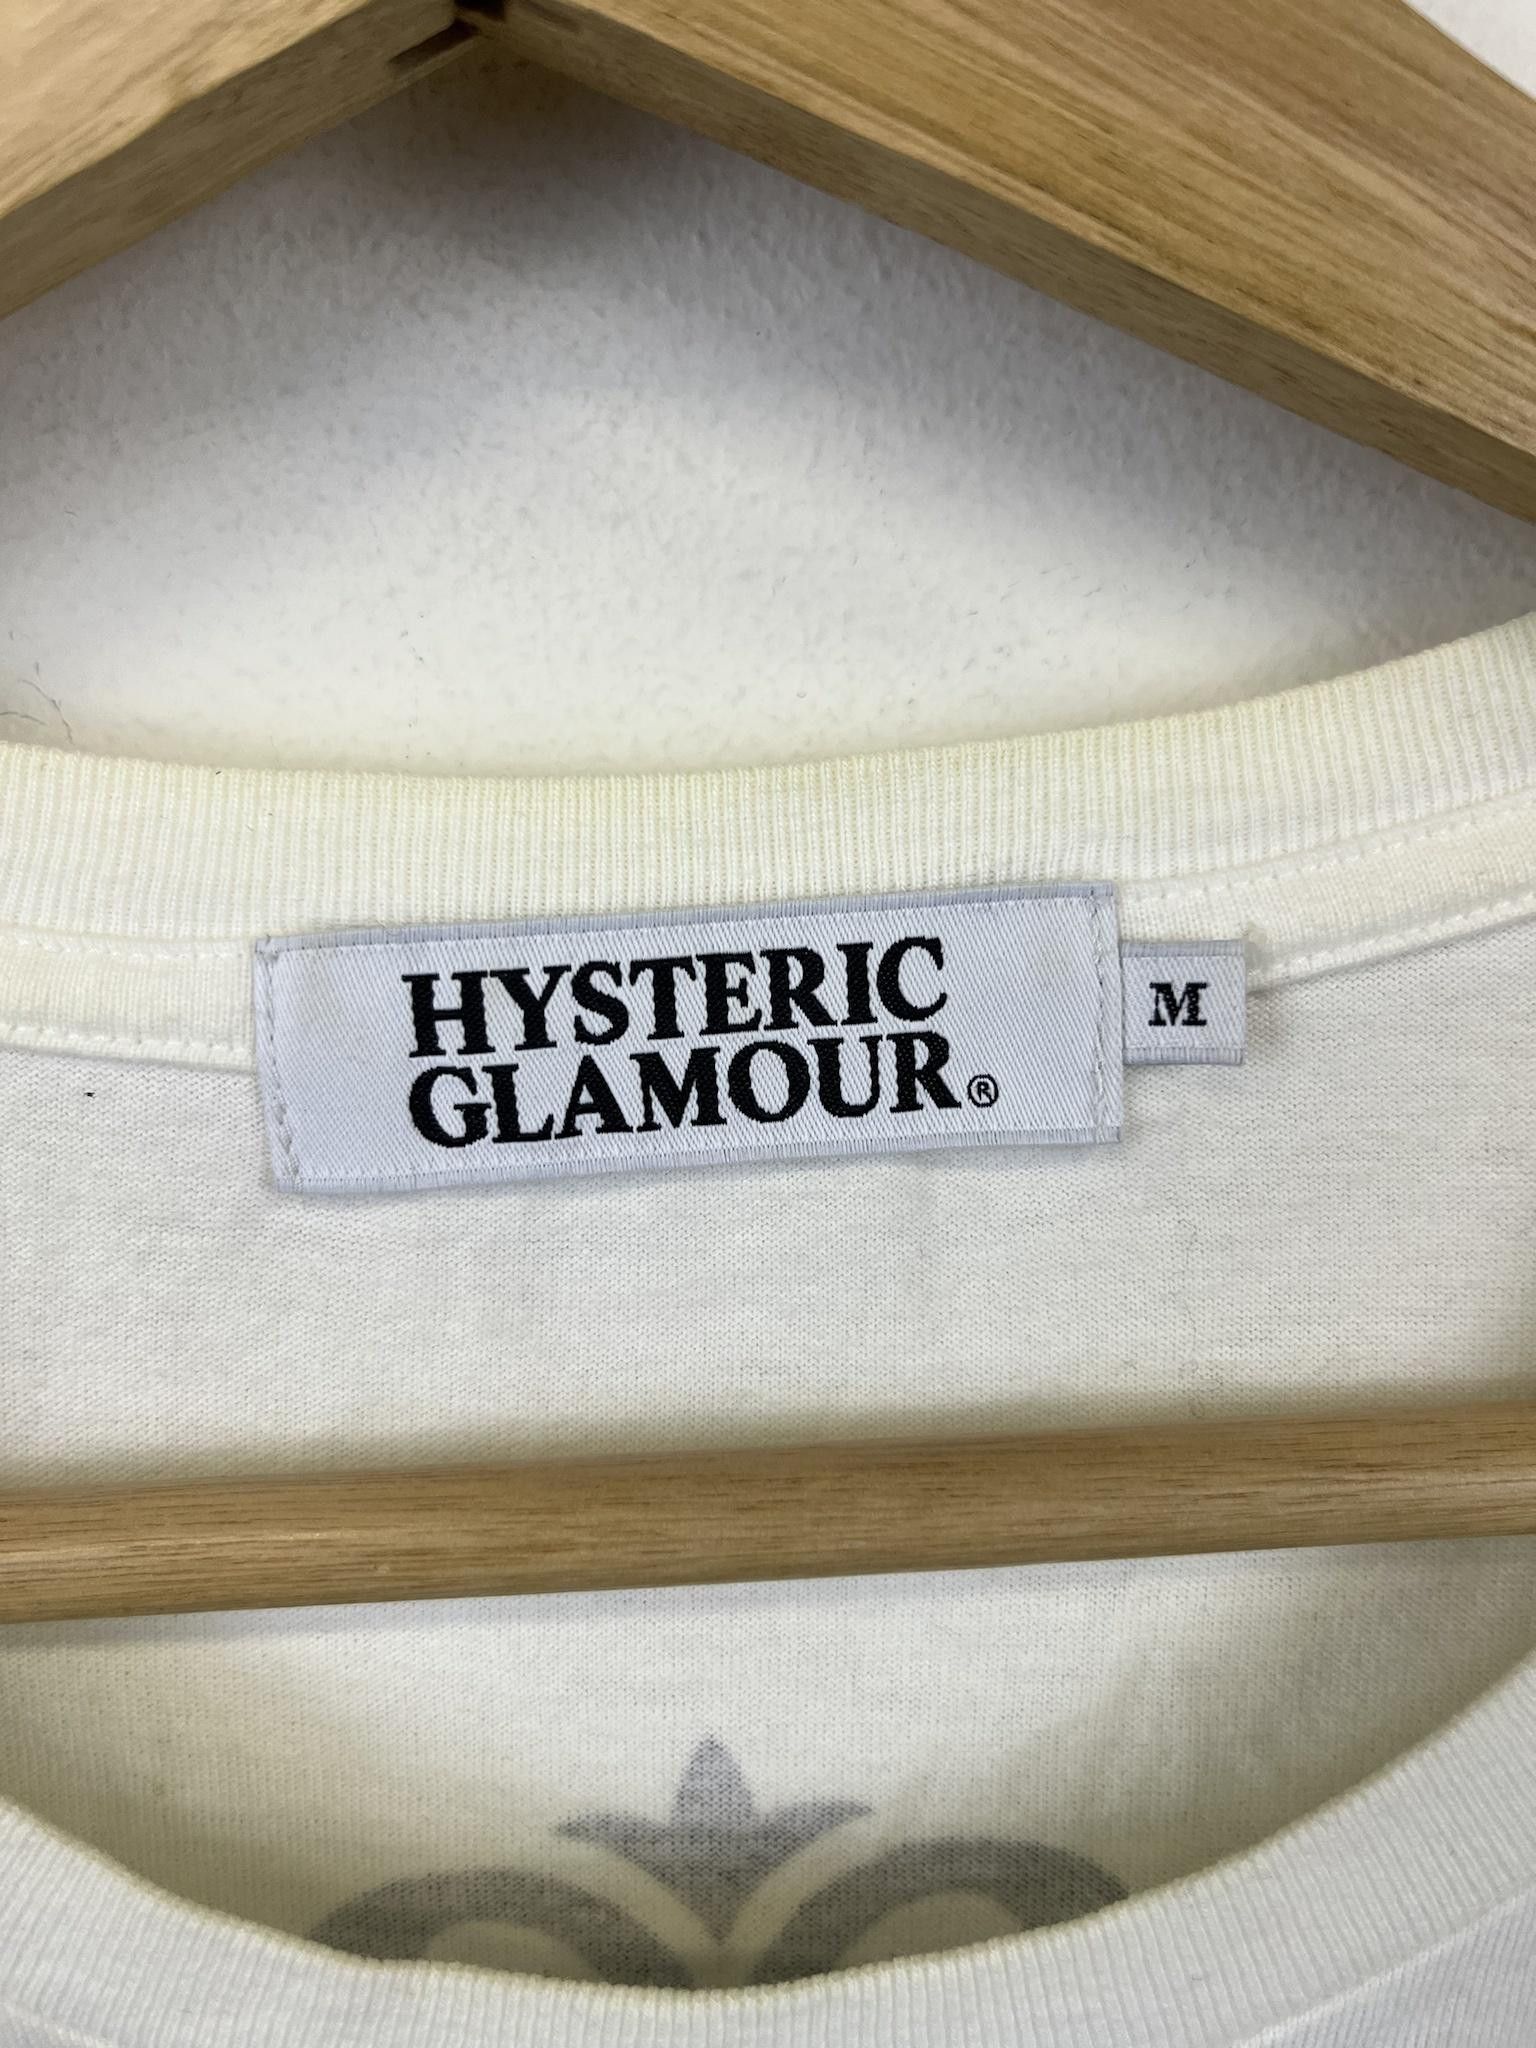 Hysteric Glamour Hysteric Glamour Lucifer Rising Girls Tee Size US M / EU 48-50 / 2 - 2 Preview